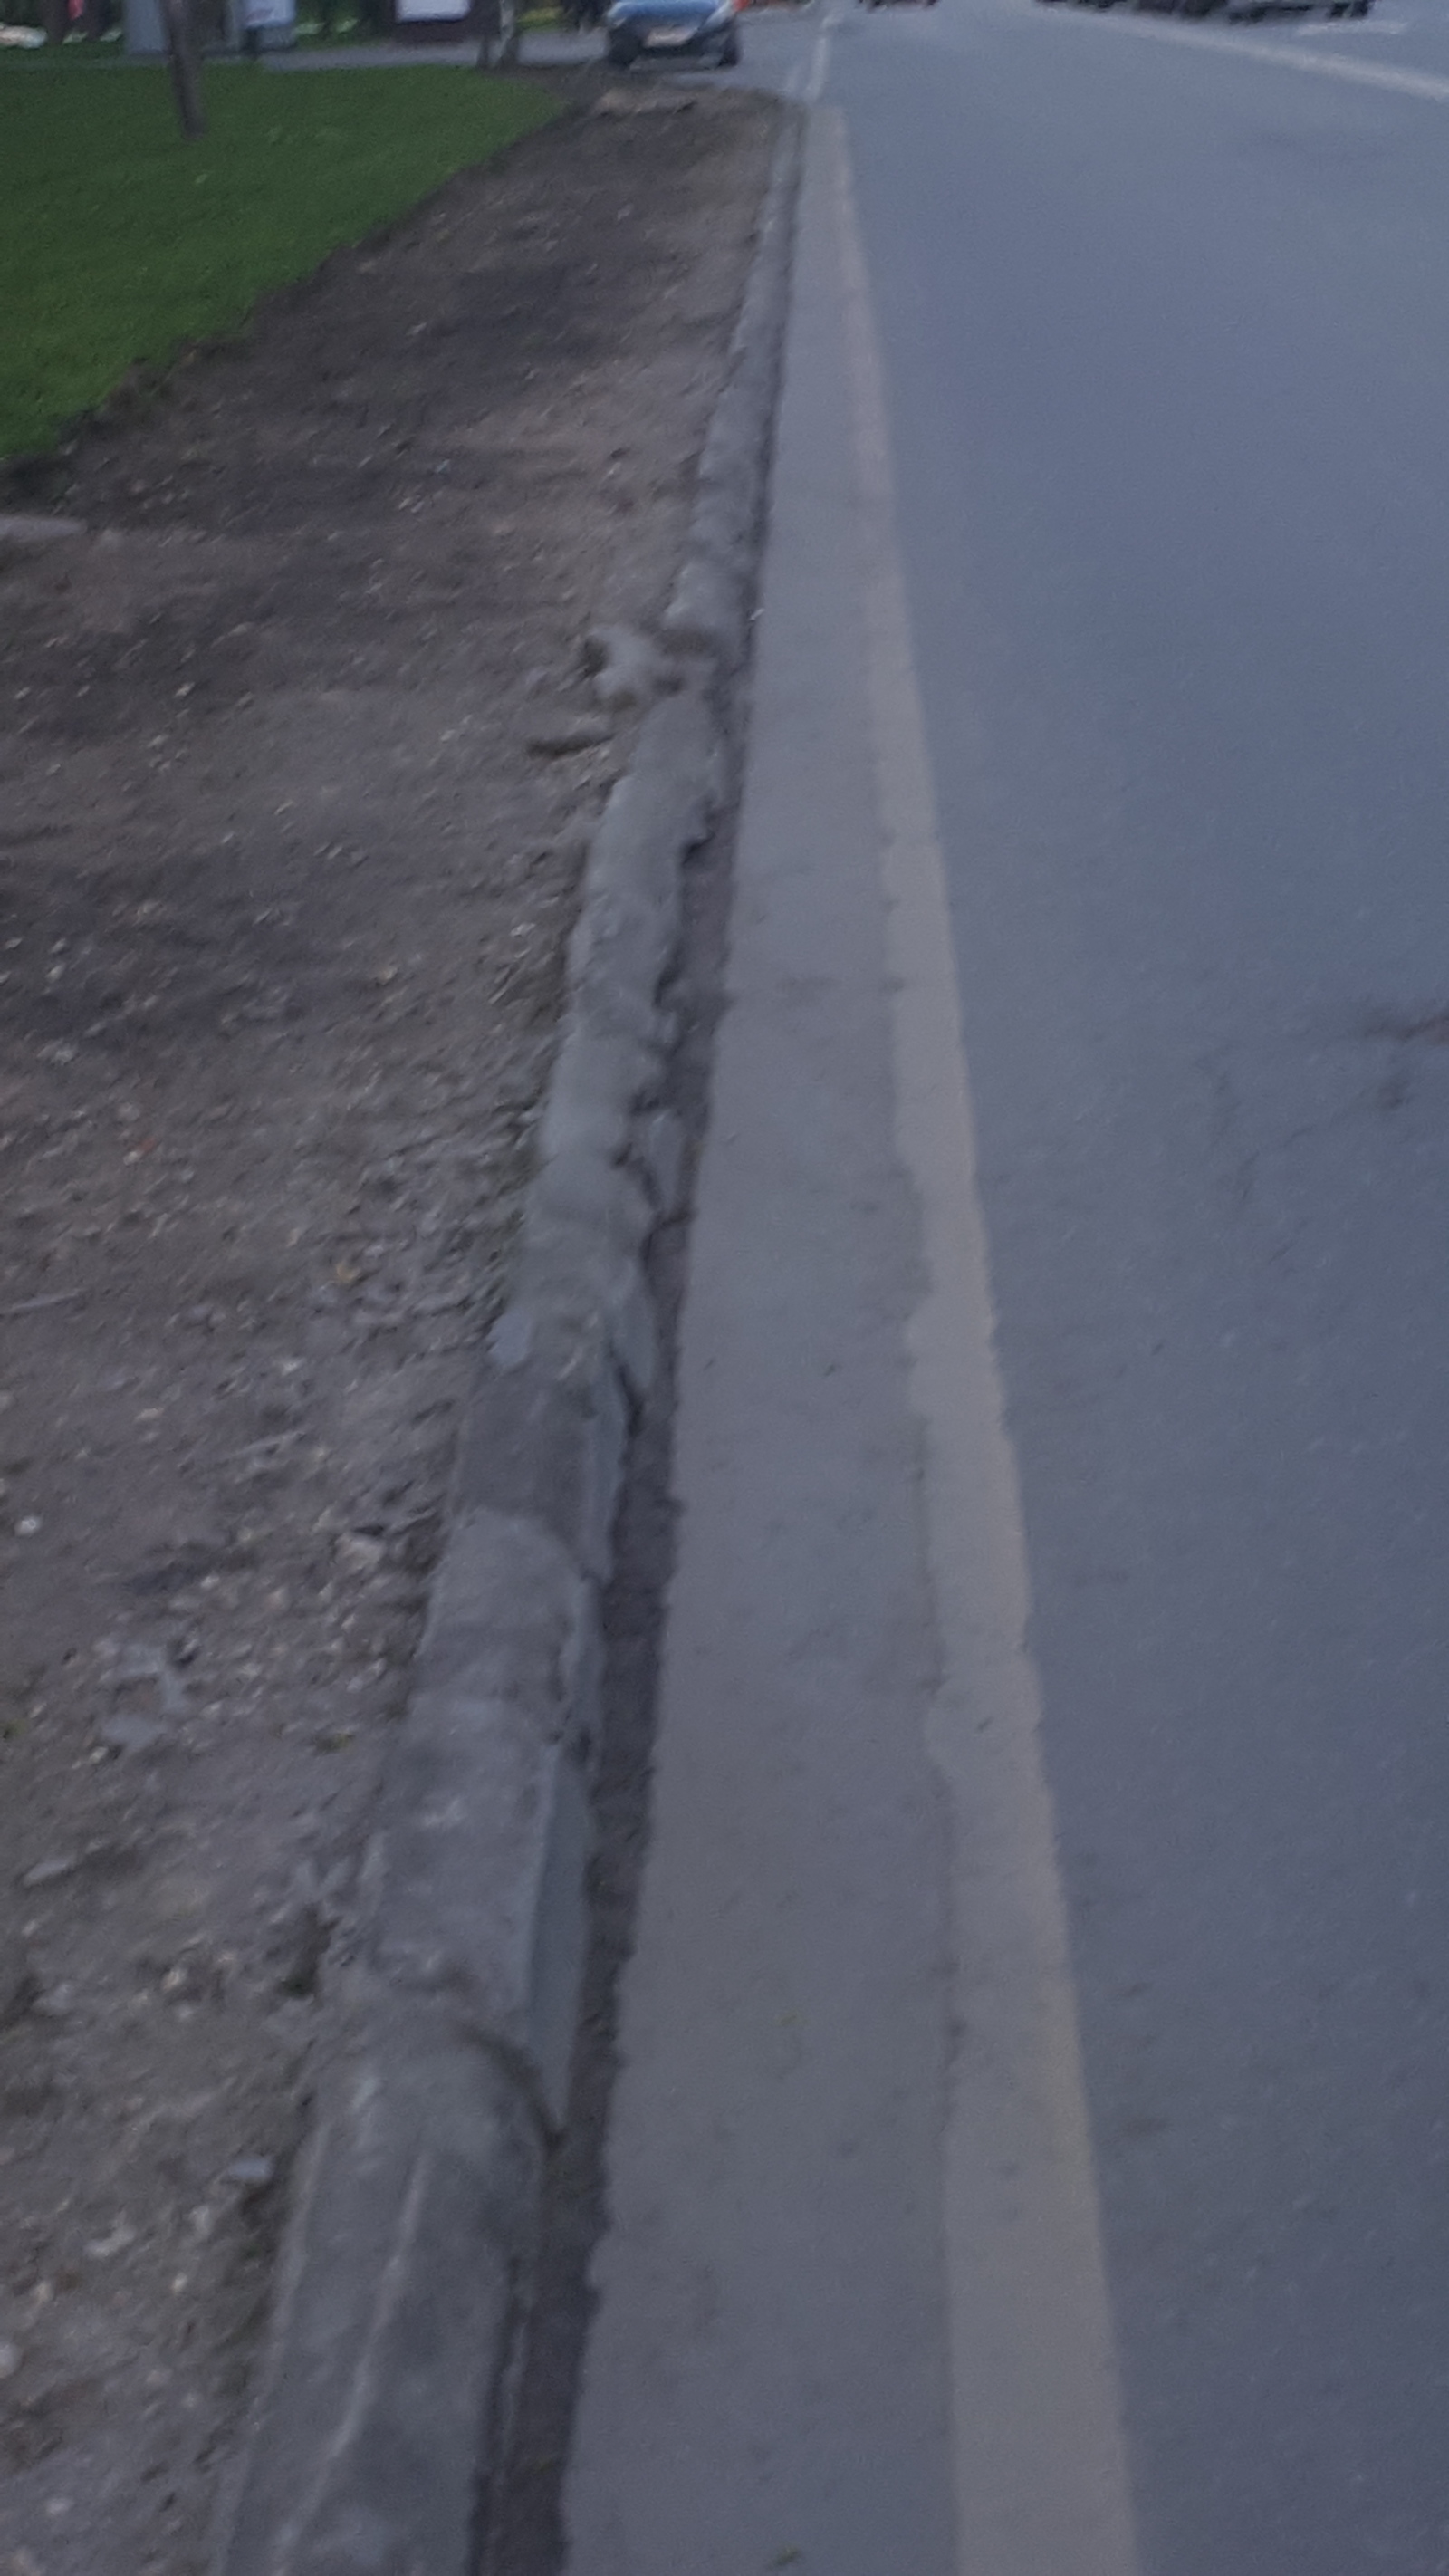 Know-how for replacing curbs in Biryulyovo - My, , Border, Longpost, Suddenly